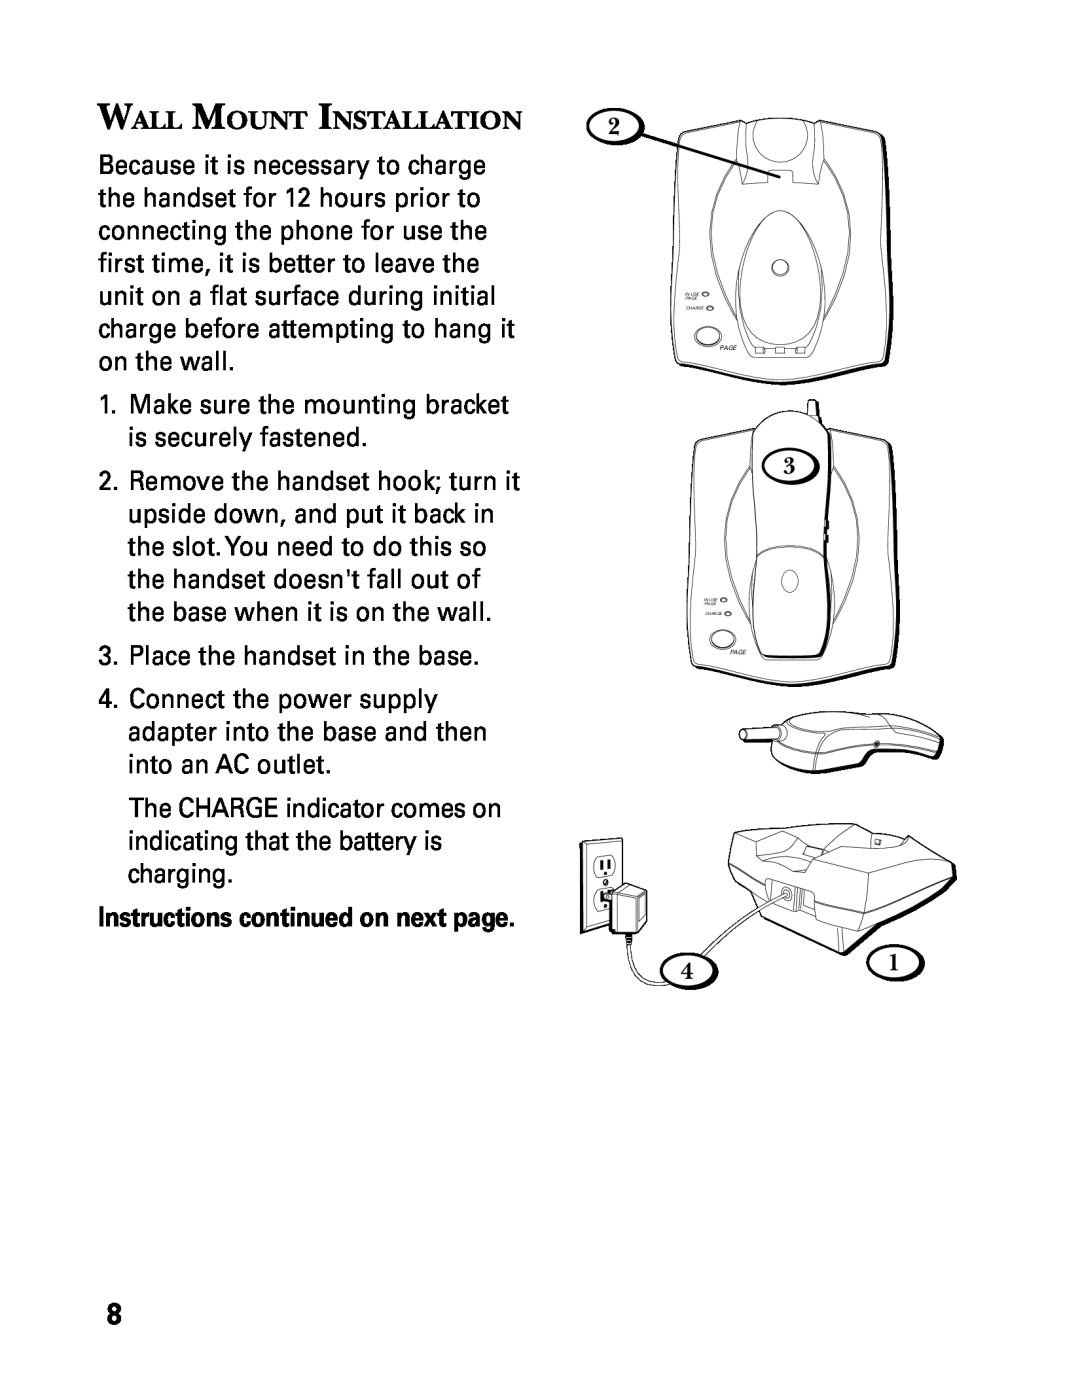 GE 27730 manual Wall Mount Installation, Instructions continued on next page 